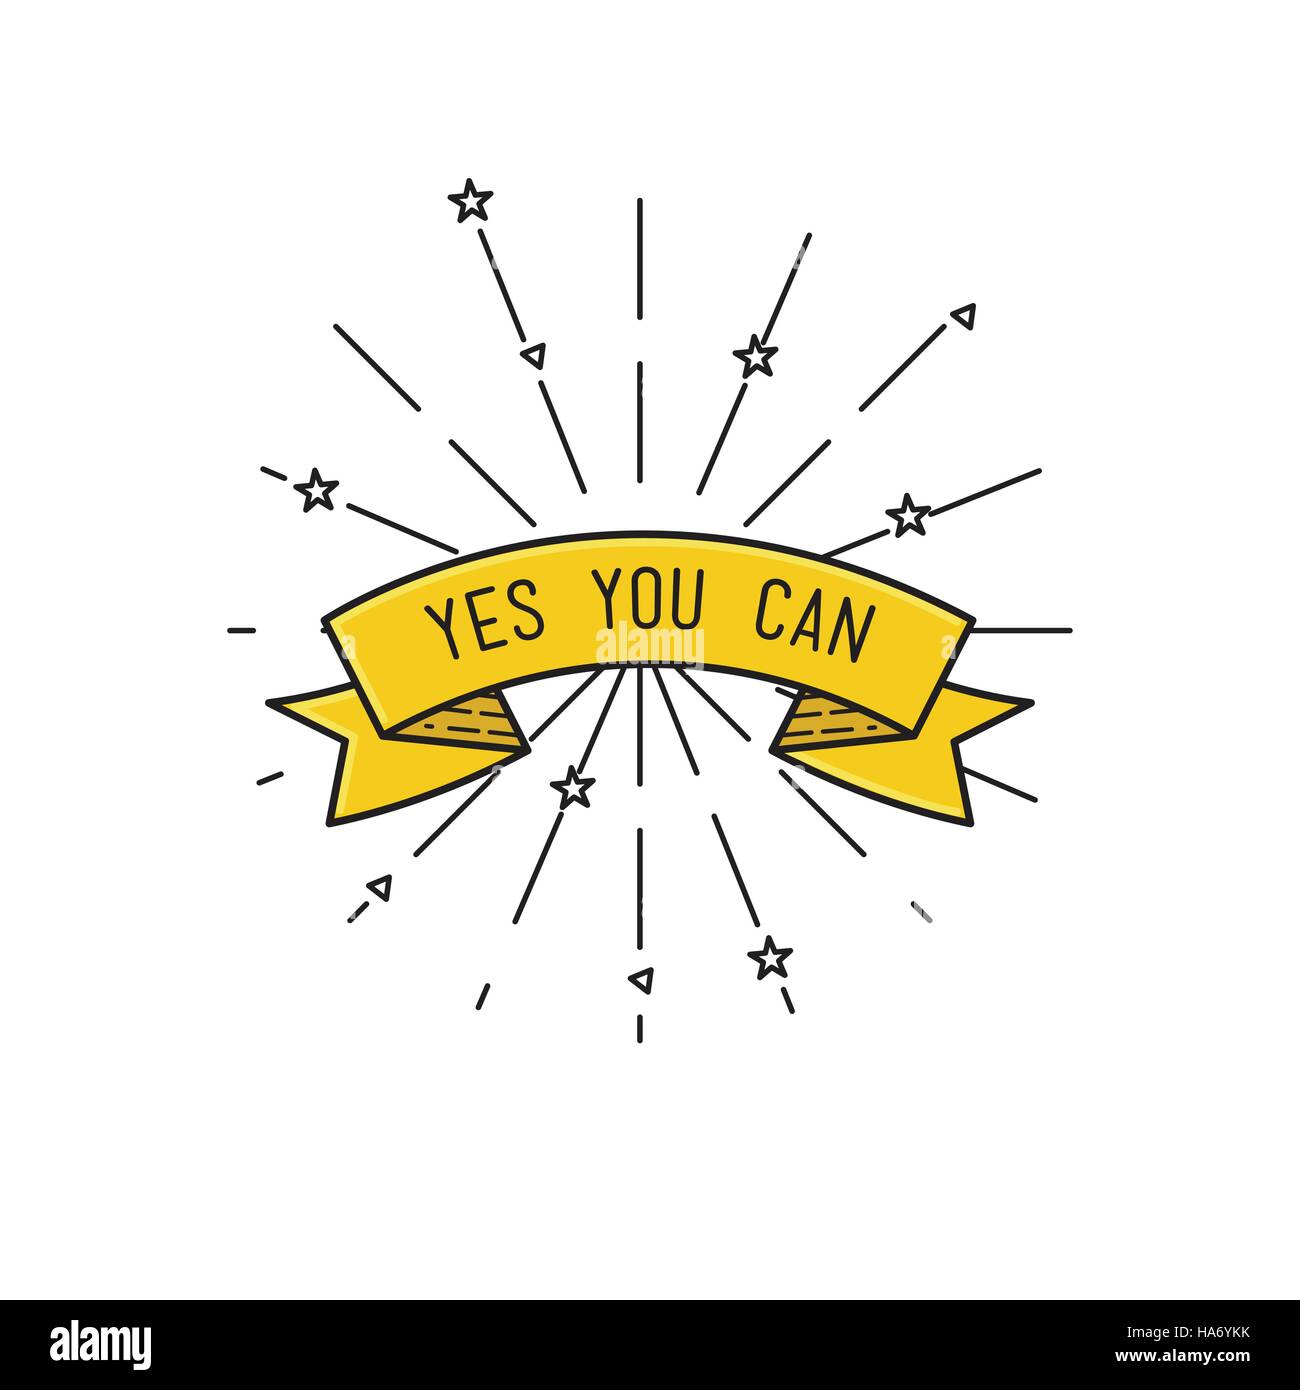 Yes You Can Inspirational Vector Illustration Motivational Quotes Stock Vector Image Art Alamy